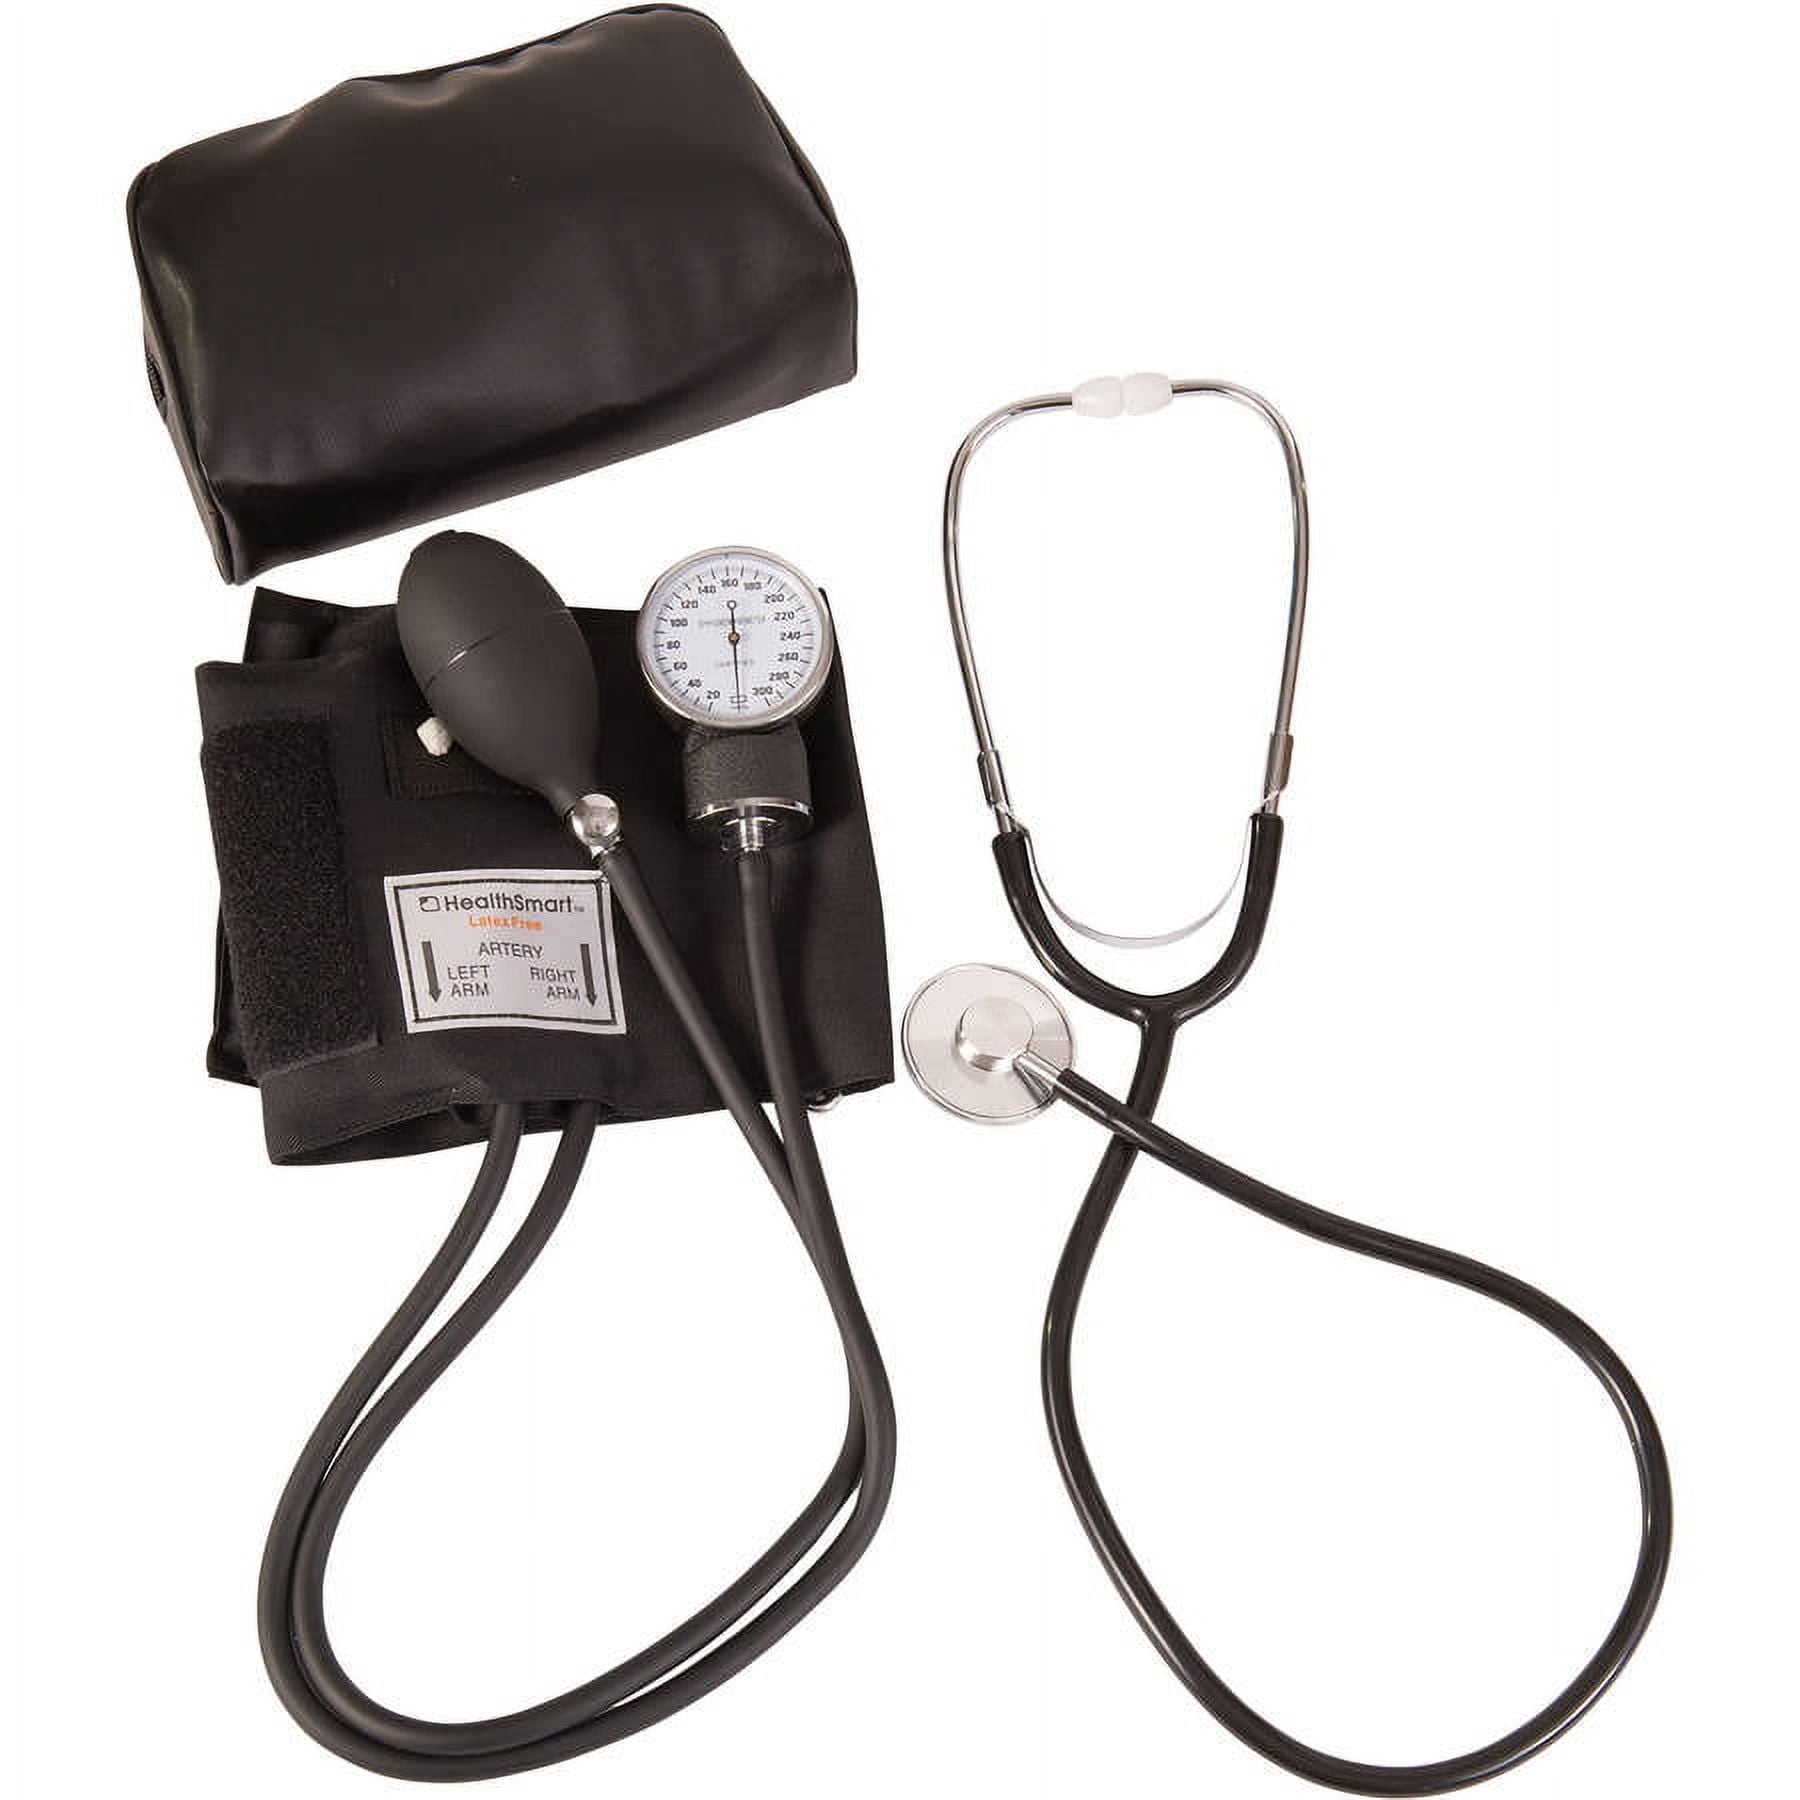 Blood Pressure Monitor Adult Manual With Stethoscope Xl Cuff, Manual Blood  Pressure, HLBPMAL, HLBPMAL, HLBPMAL, HLBPMAL, HLBPMAL